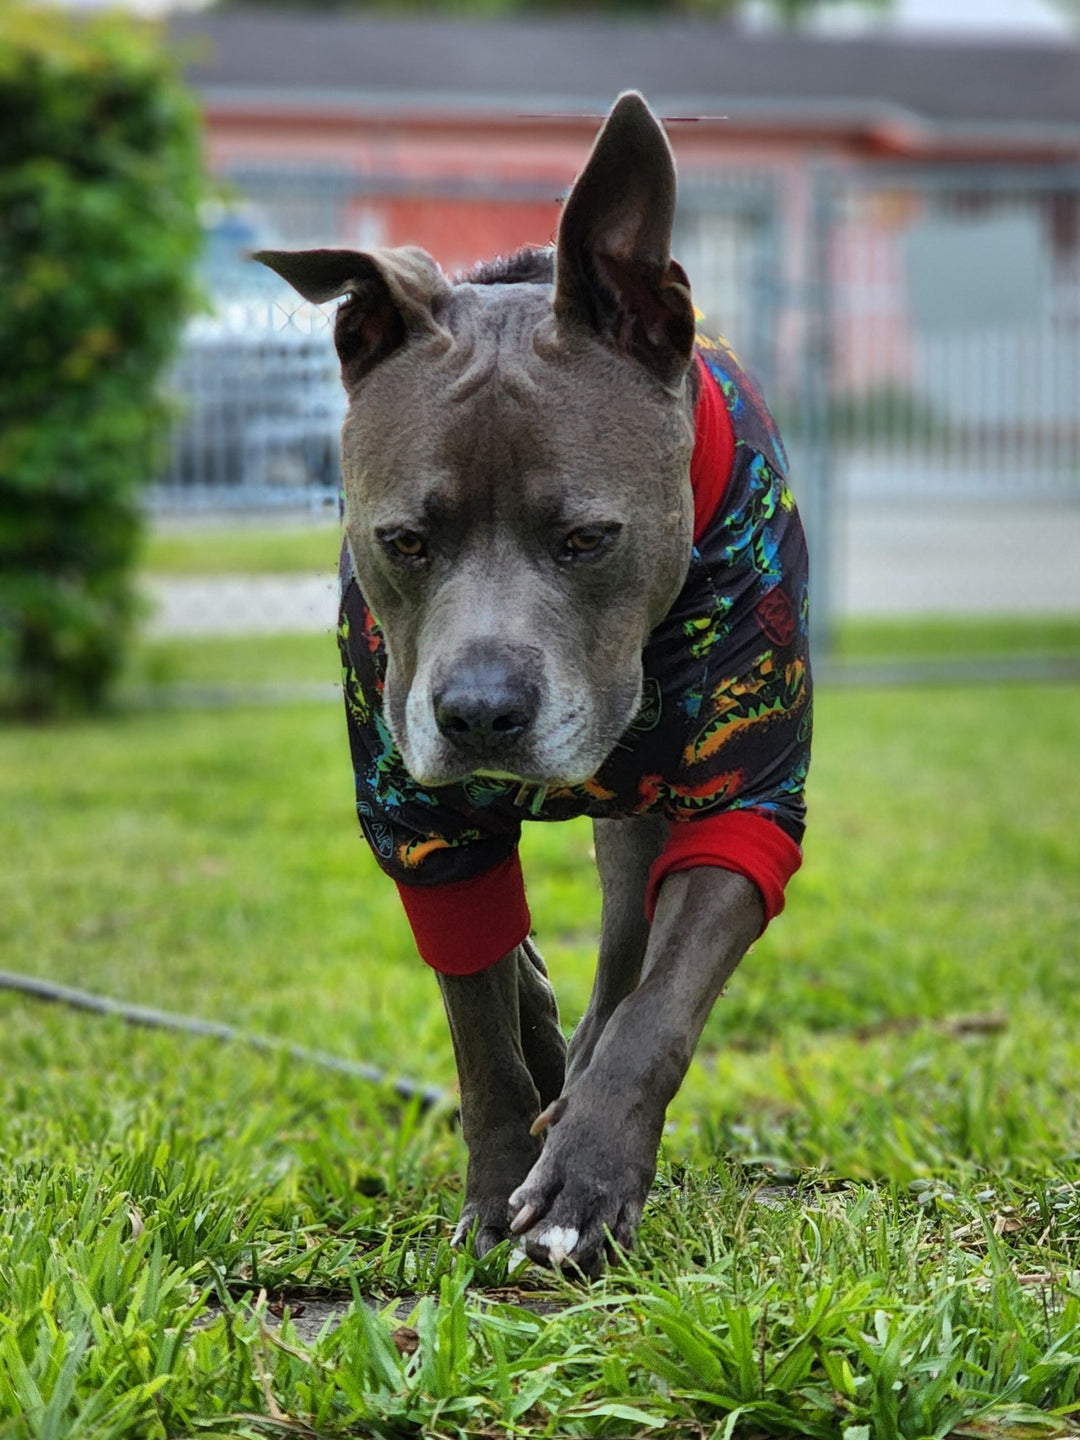 Pitbull in stride wearing Jax & Molly's pajamas with neon dinosaur print with red trim